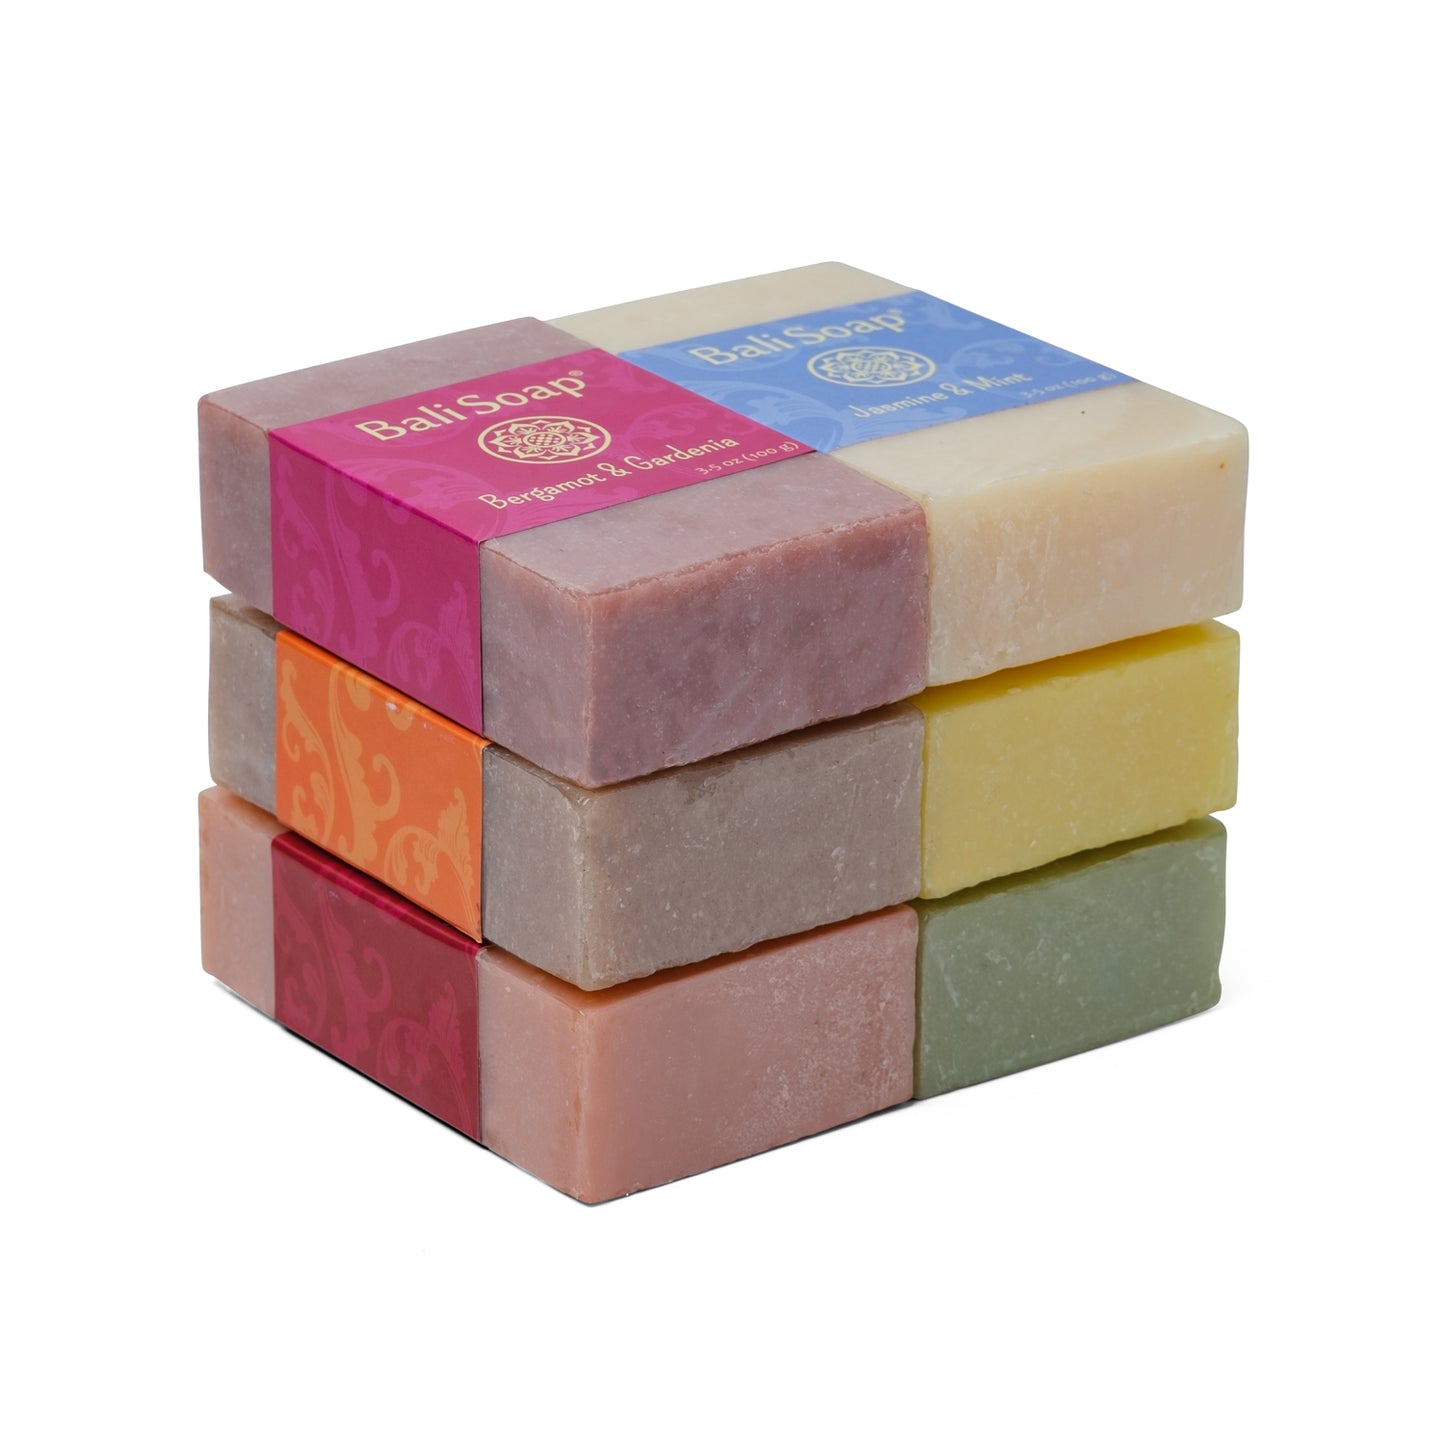 PACKAGE CONTENT 6 SOAP BAR - FEMININE COLLECTION